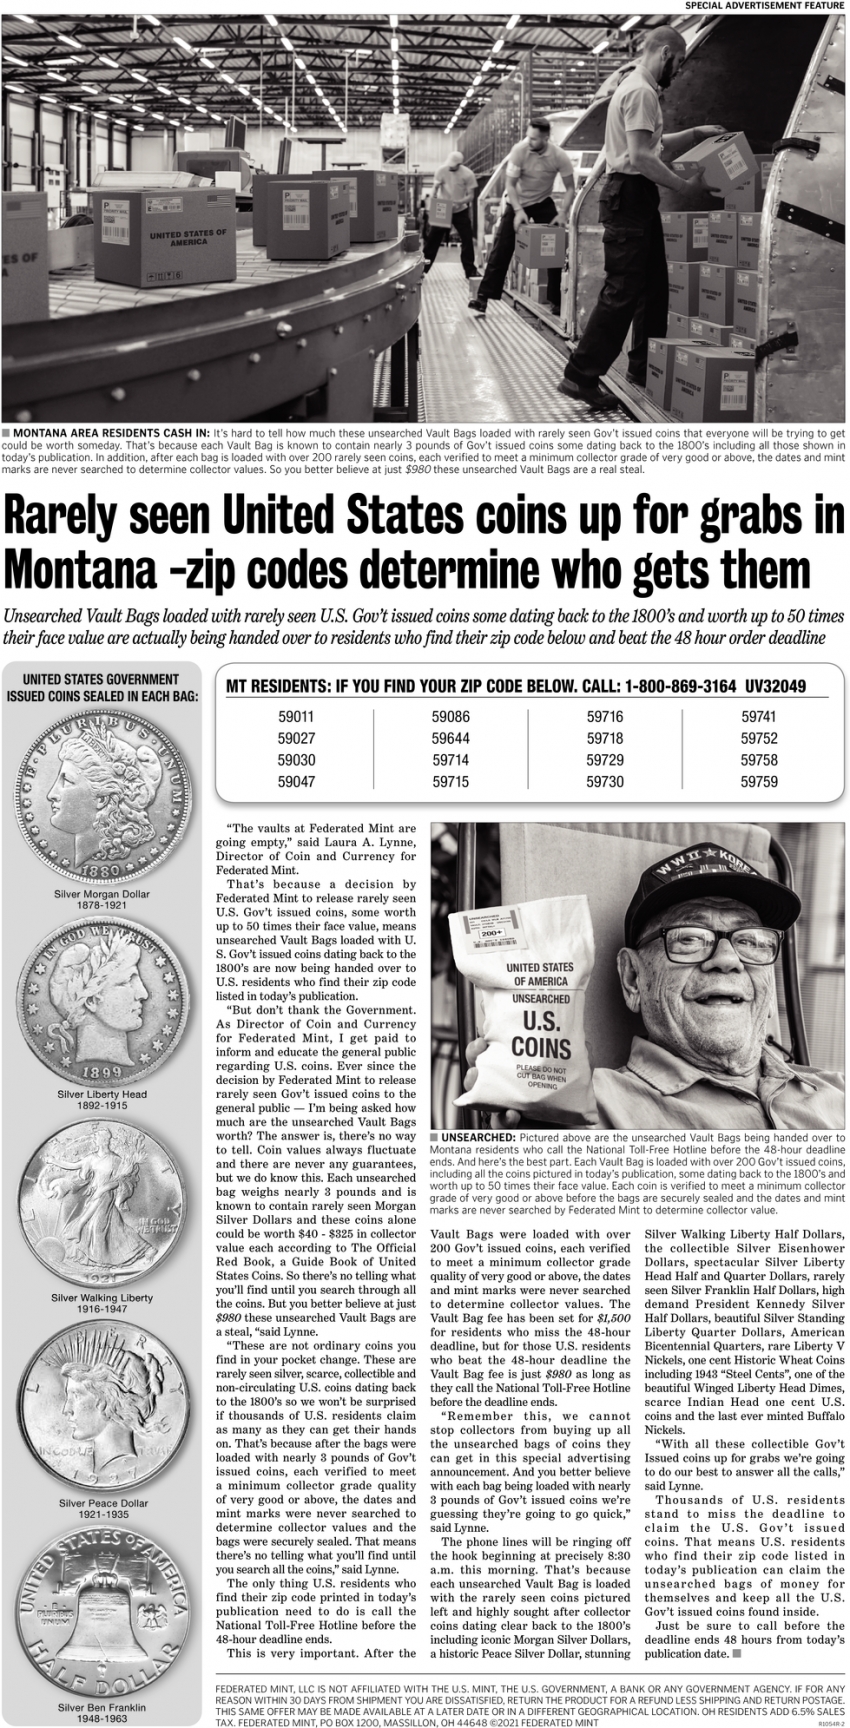 Rarely Seen United States Coins Up For Grabs In Montana